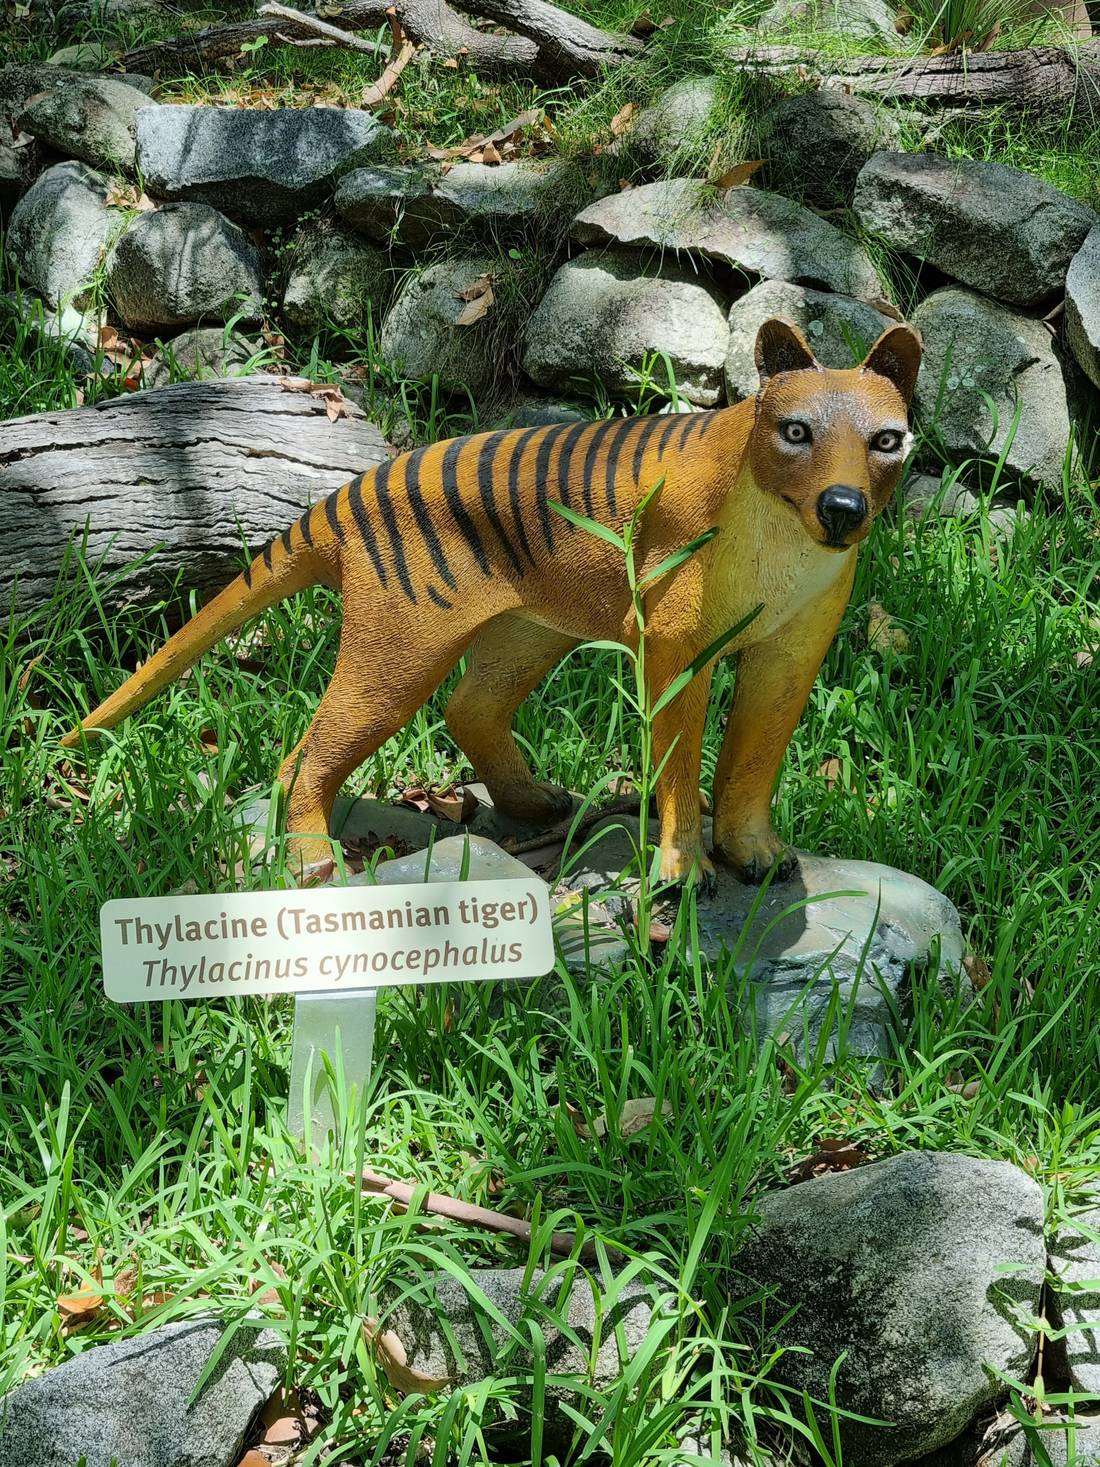 This display looked a little bit like Jurassic Park. Zeroed in on a model of the, now extinct, Tasmanian Tiger.